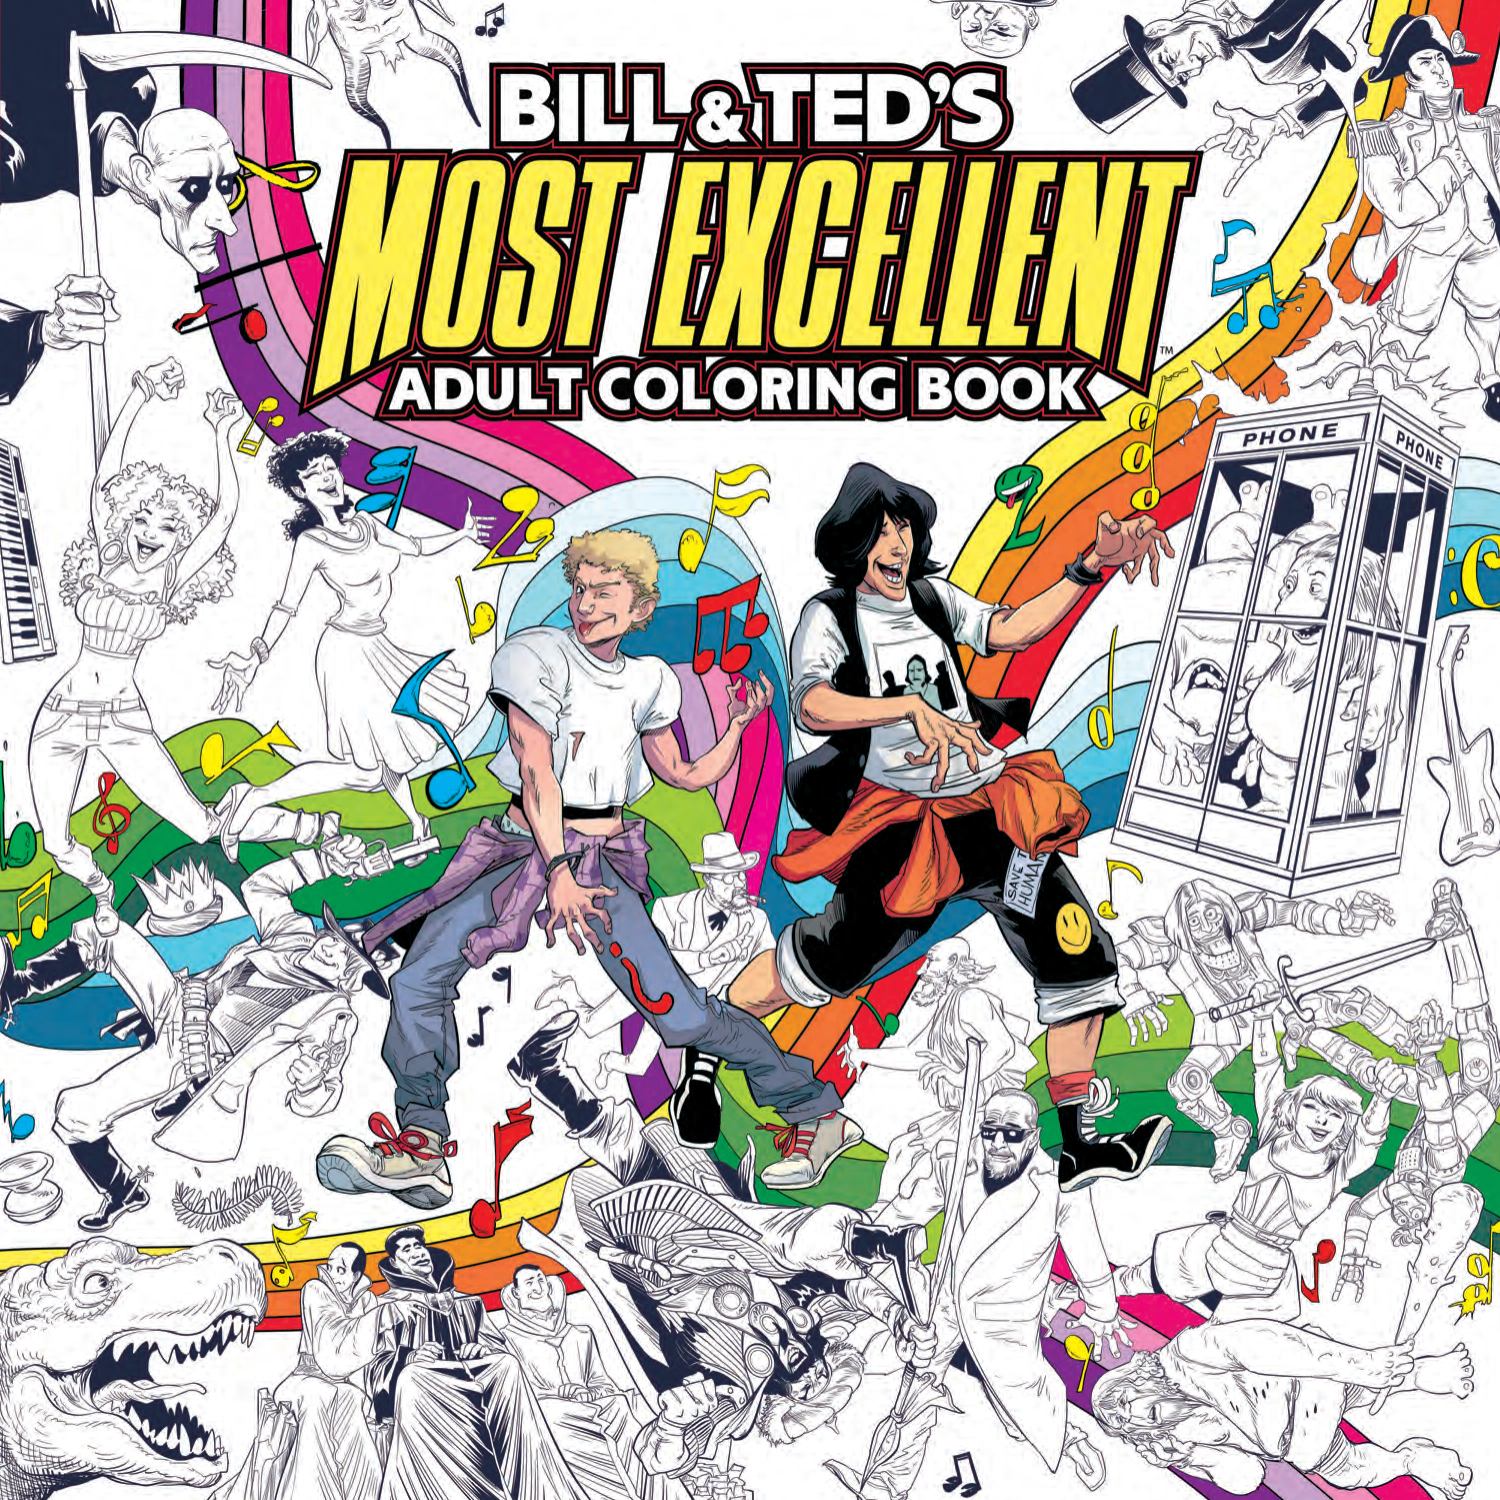 Bill&Ted’s Most Excellent Adult Coloring SC_PRESS_1